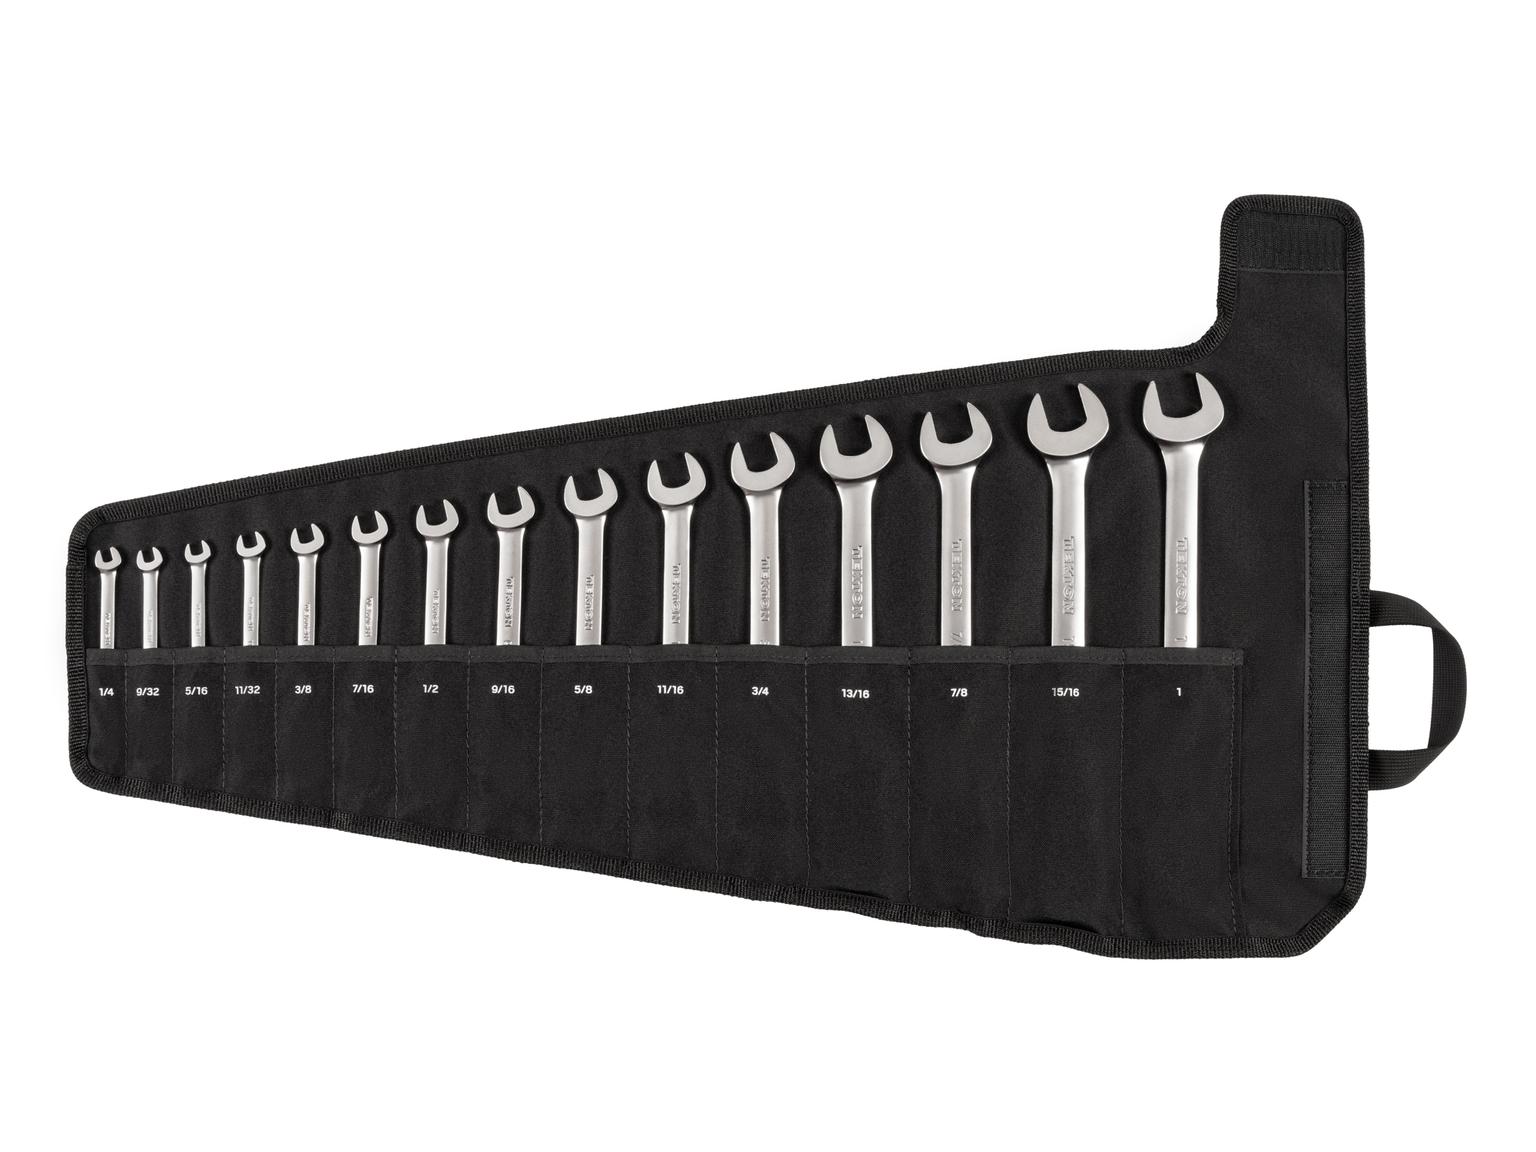 Reversible 12-Point Ratcheting Combination Wrench Set with Pouch, 15-Piece (1/4-1 in.)